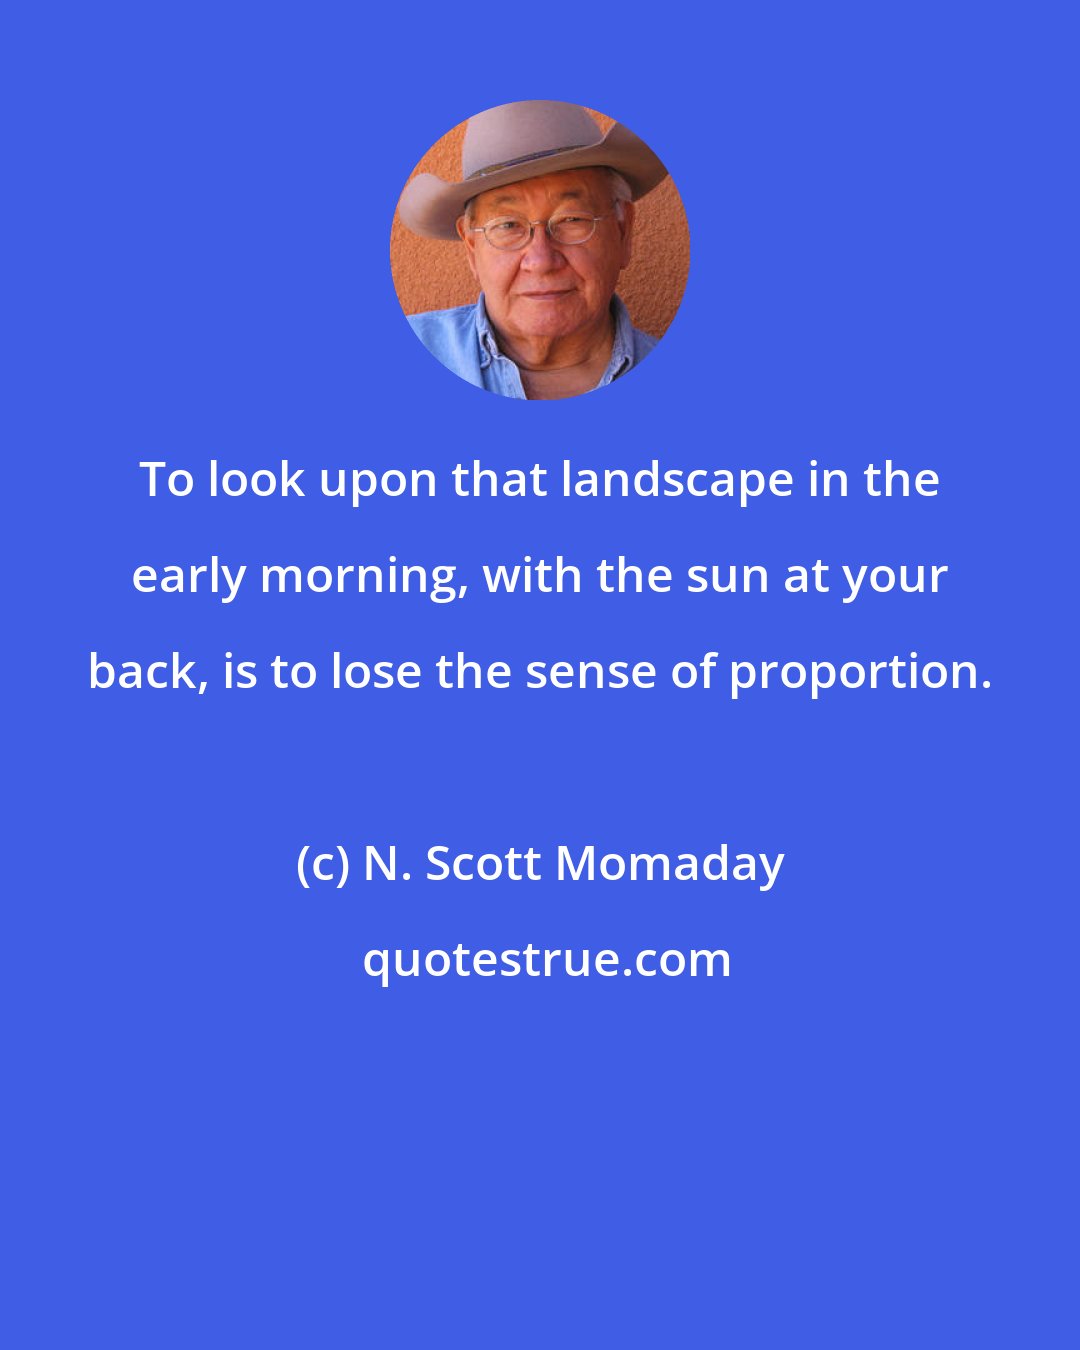 N. Scott Momaday: To look upon that landscape in the early morning, with the sun at your back, is to lose the sense of proportion.